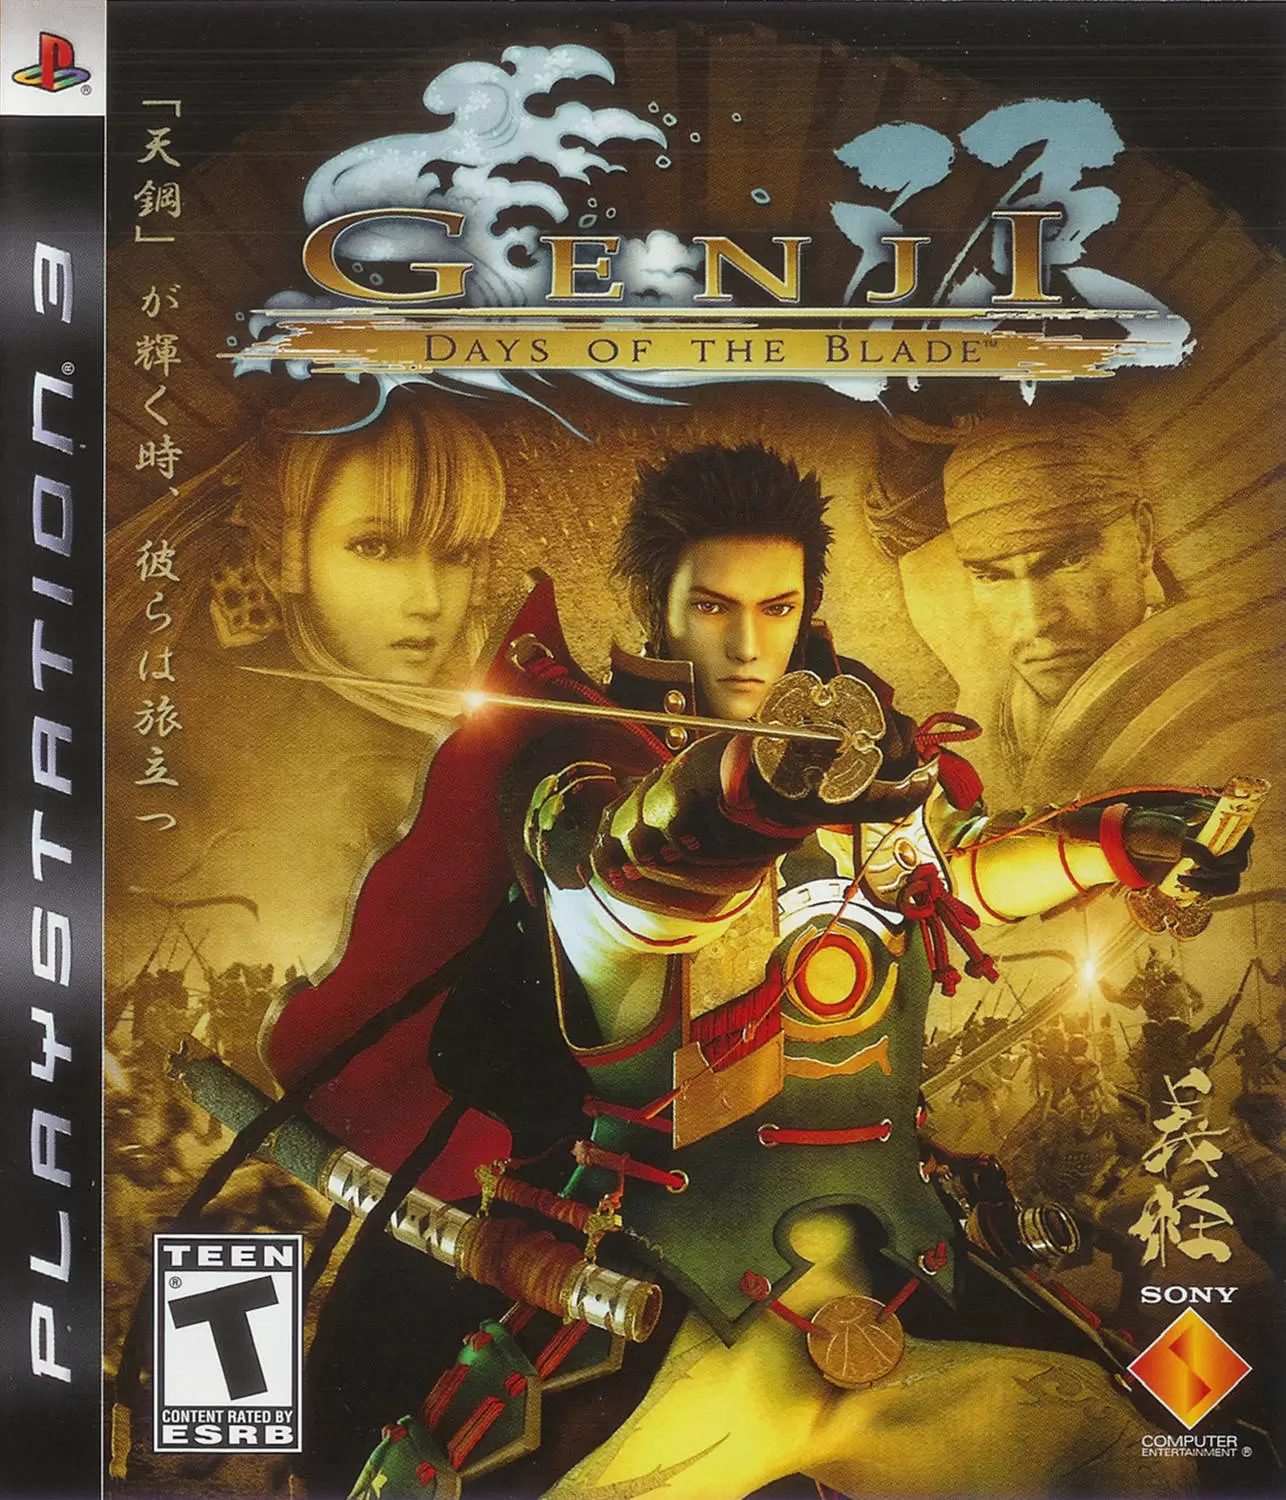 PS3 Games - Genji: Days of the Blade